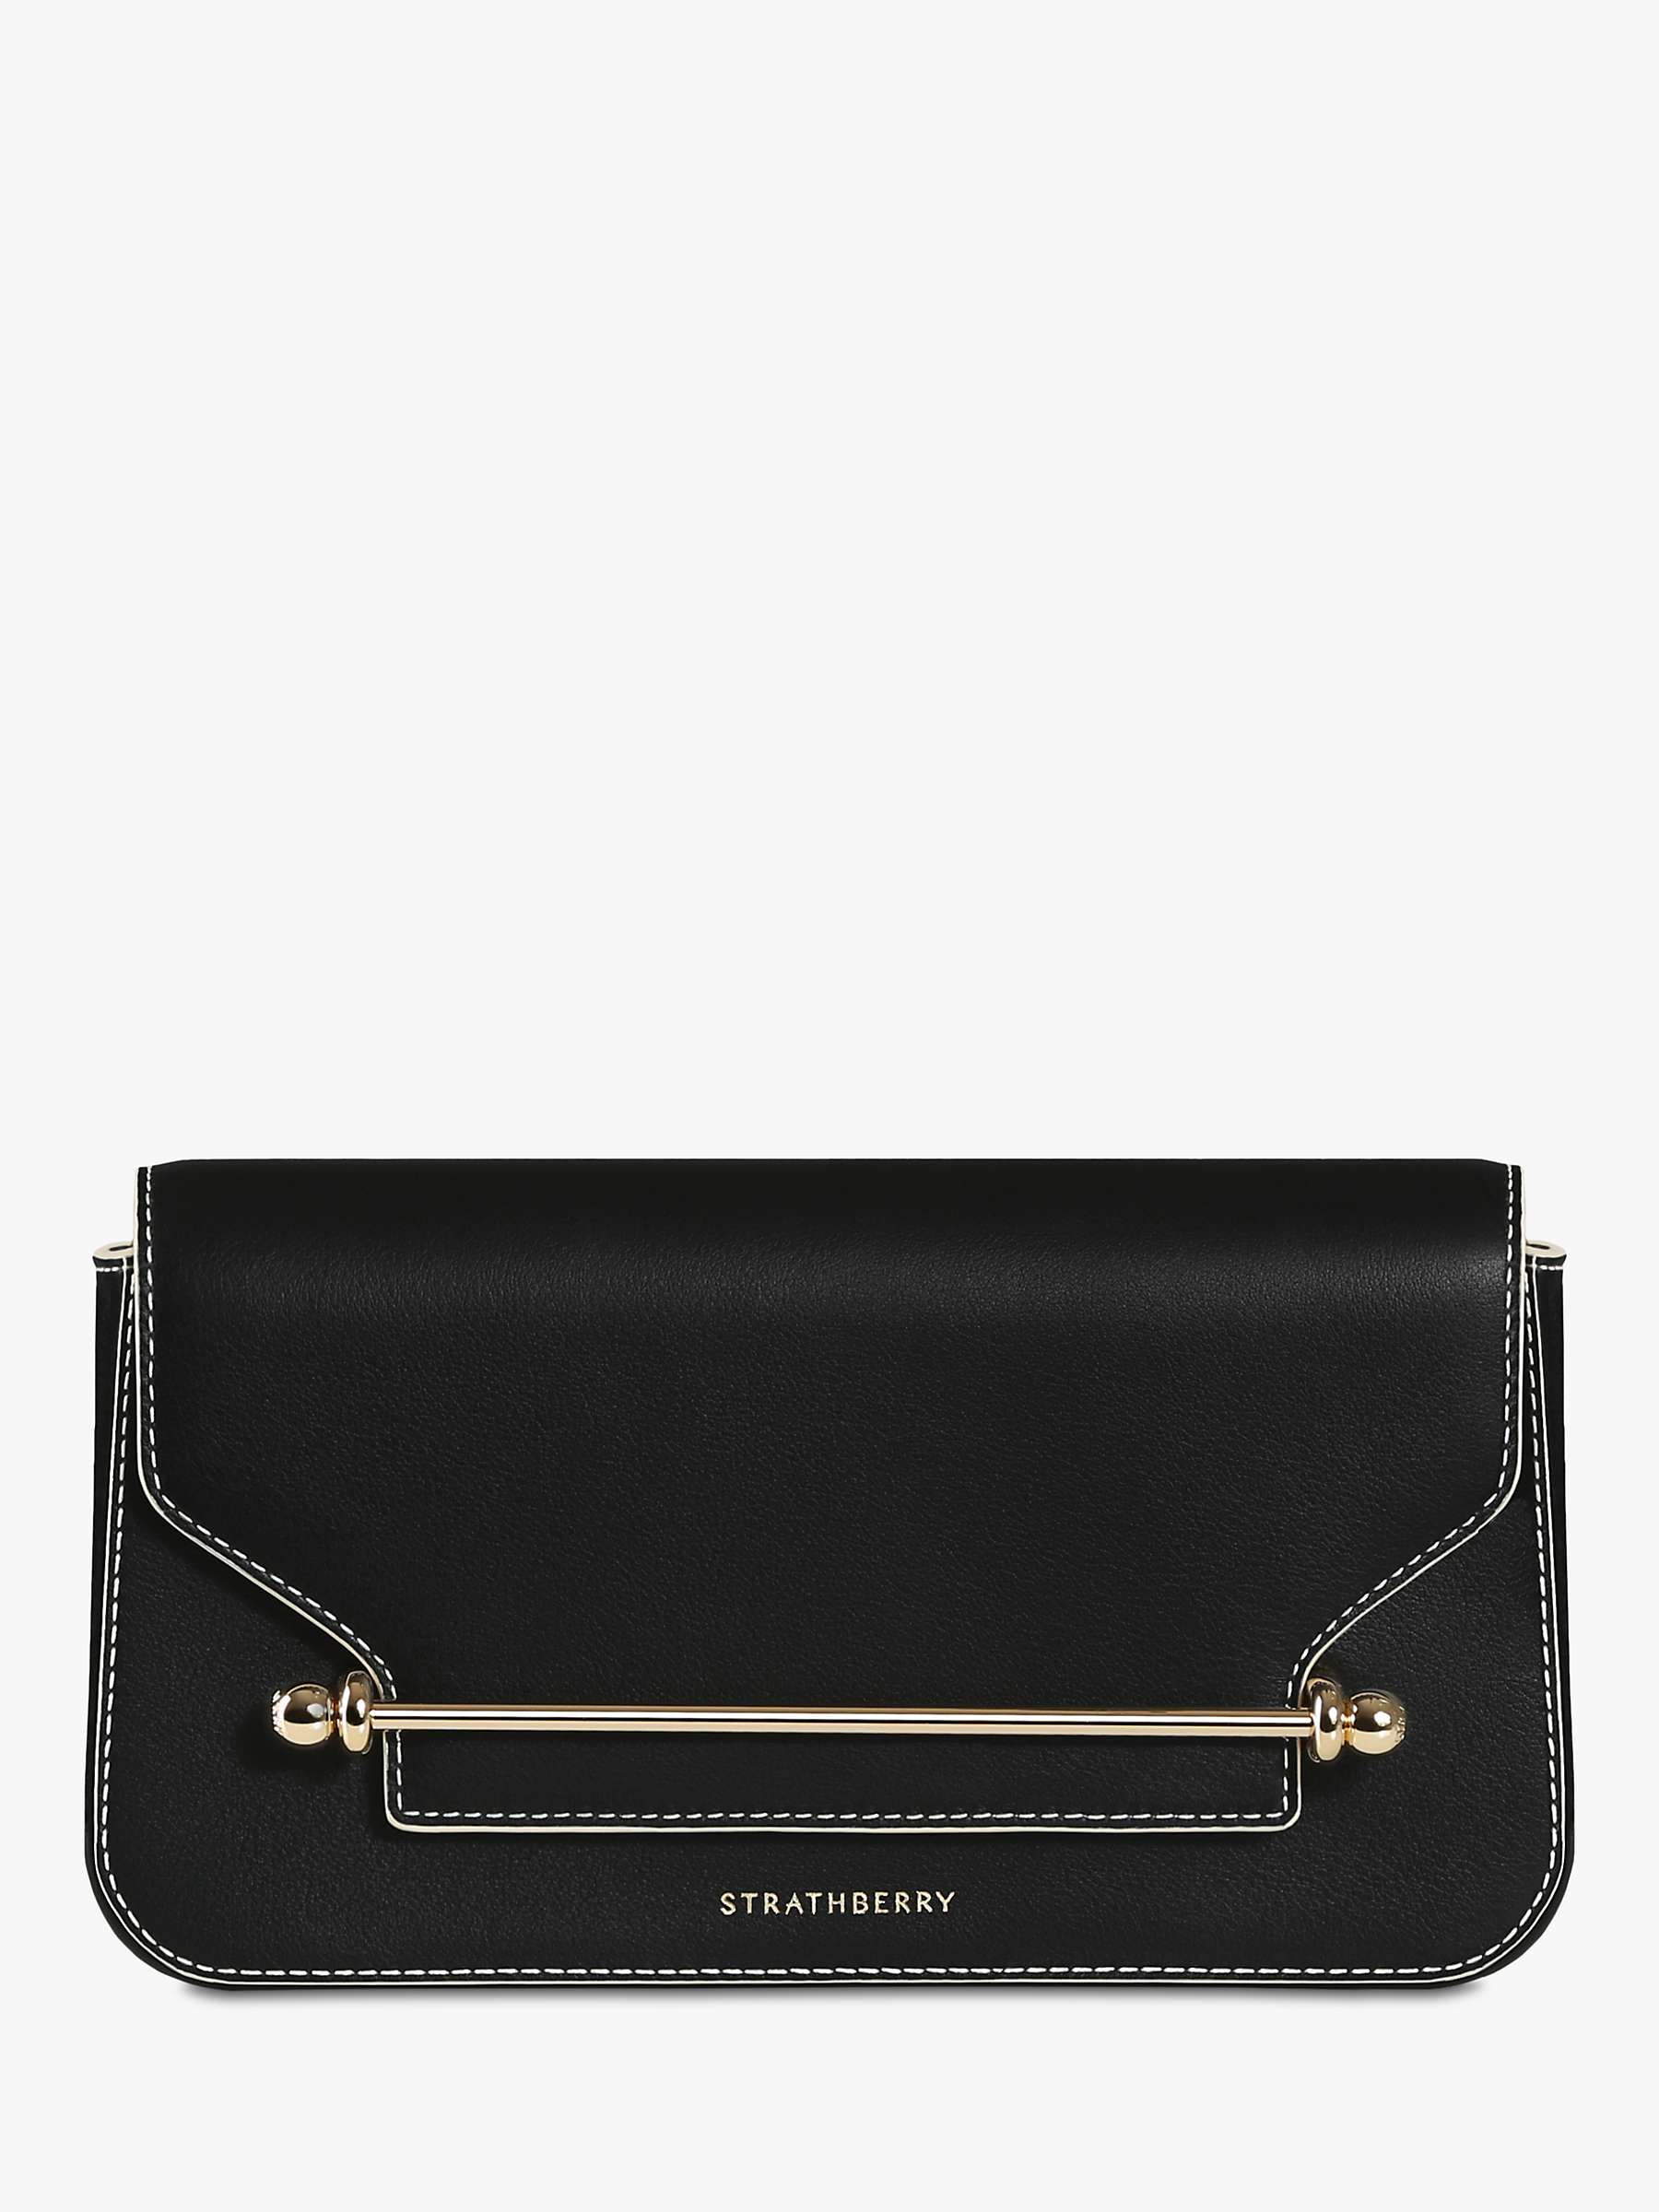 Buy Strathberry East/West Omni Leather Clutch Bag Online at johnlewis.com